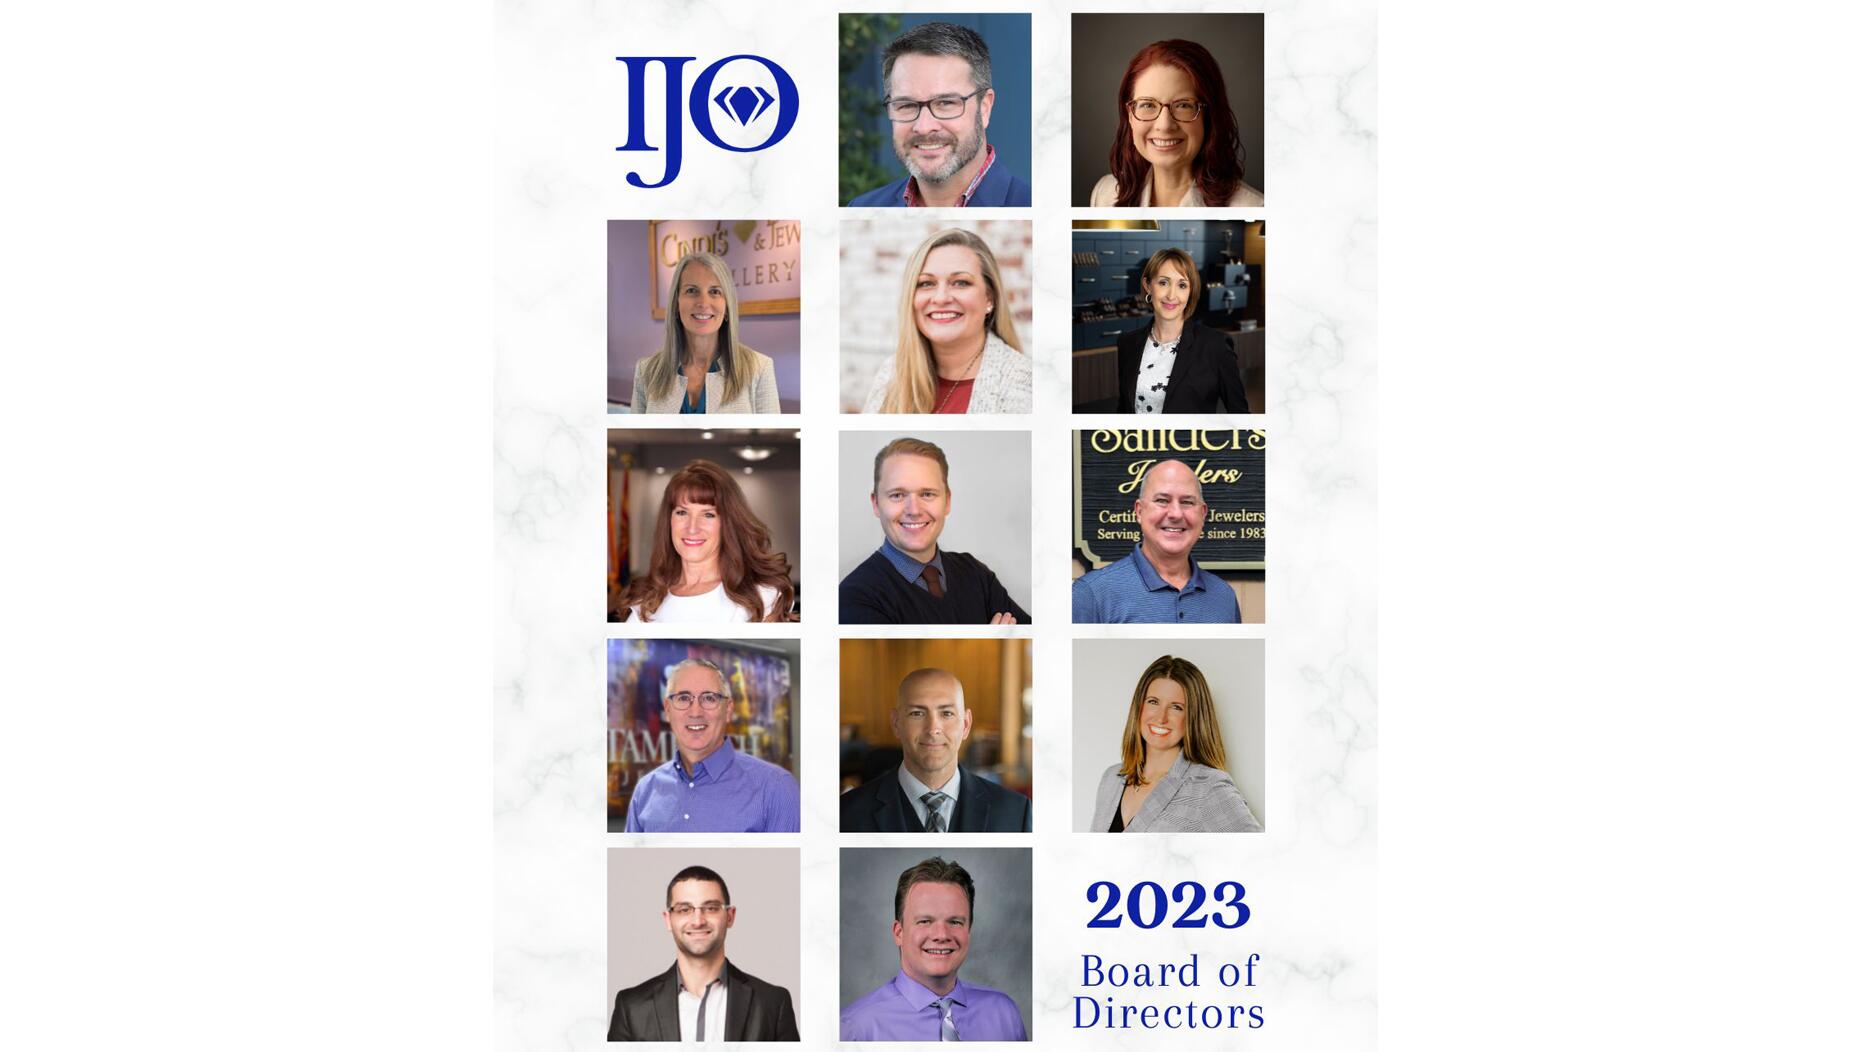 Six New Retailers Appointed to IJO’s Board of Directors